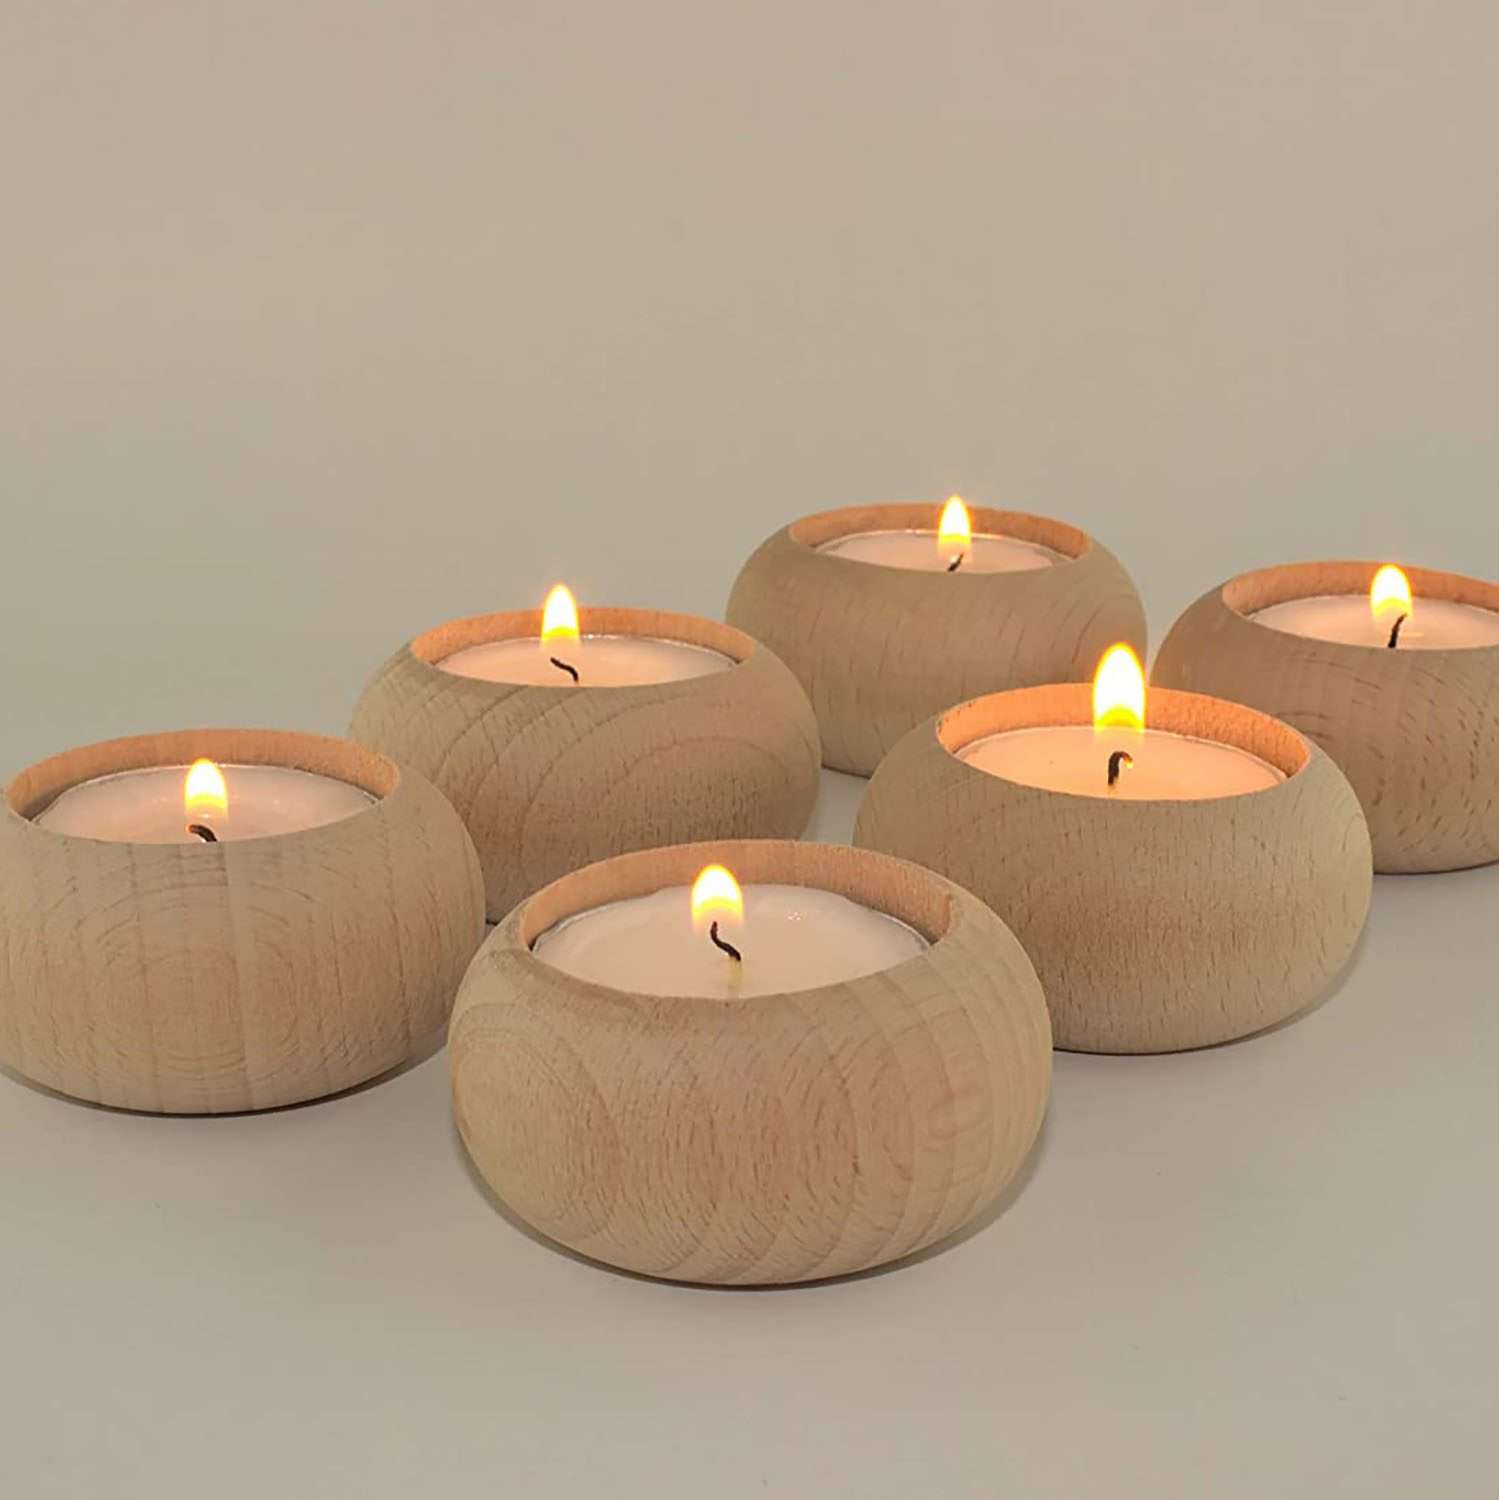 Wooden Candle Holders for votives and Tea Lights Candles | Set of 6 | Dining and Wedding Table centerpieces for Receptions or Home Decor |